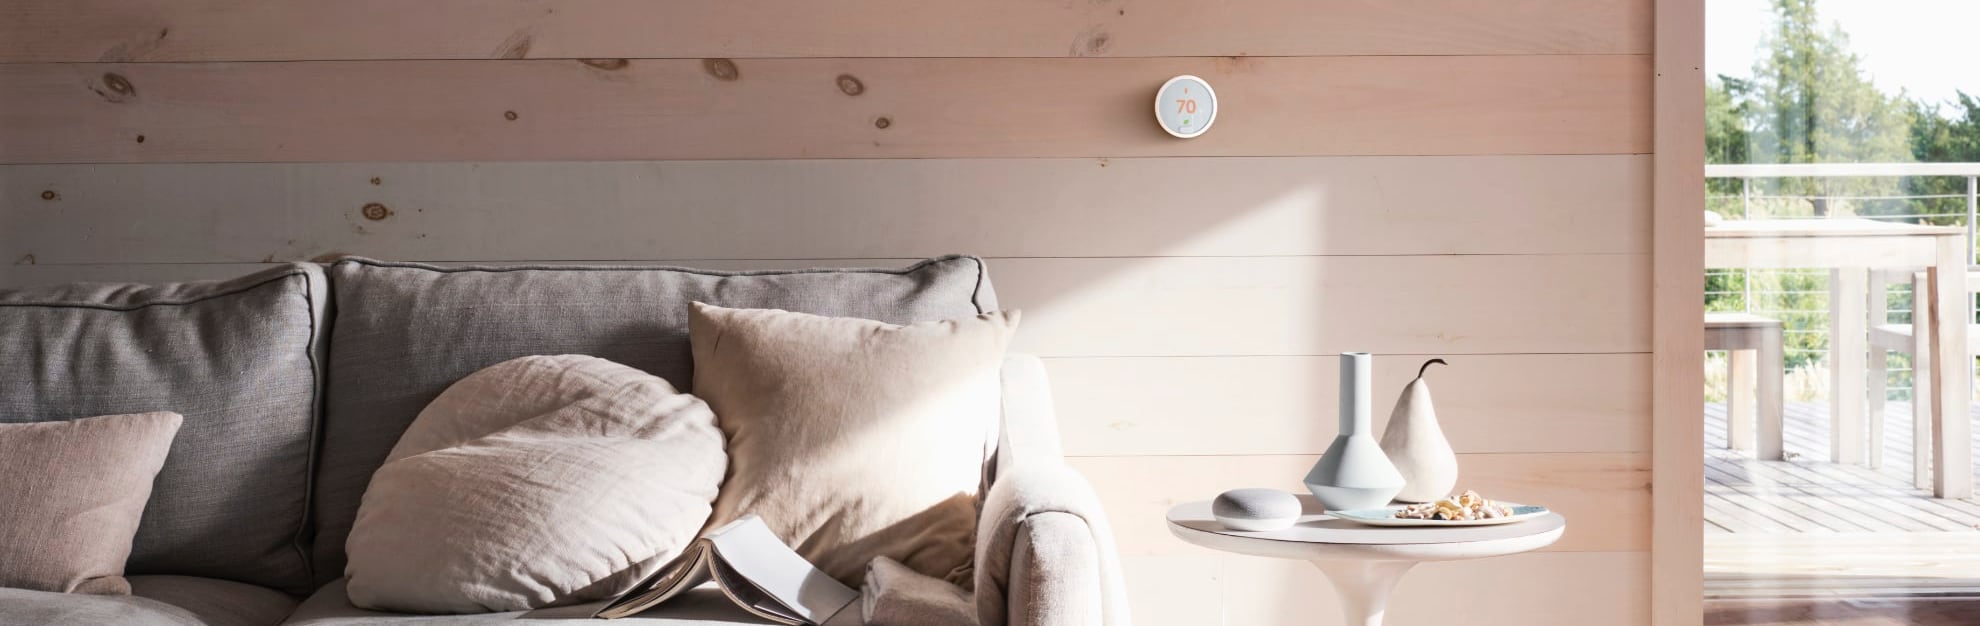 Vivint Home Automation in Hoover